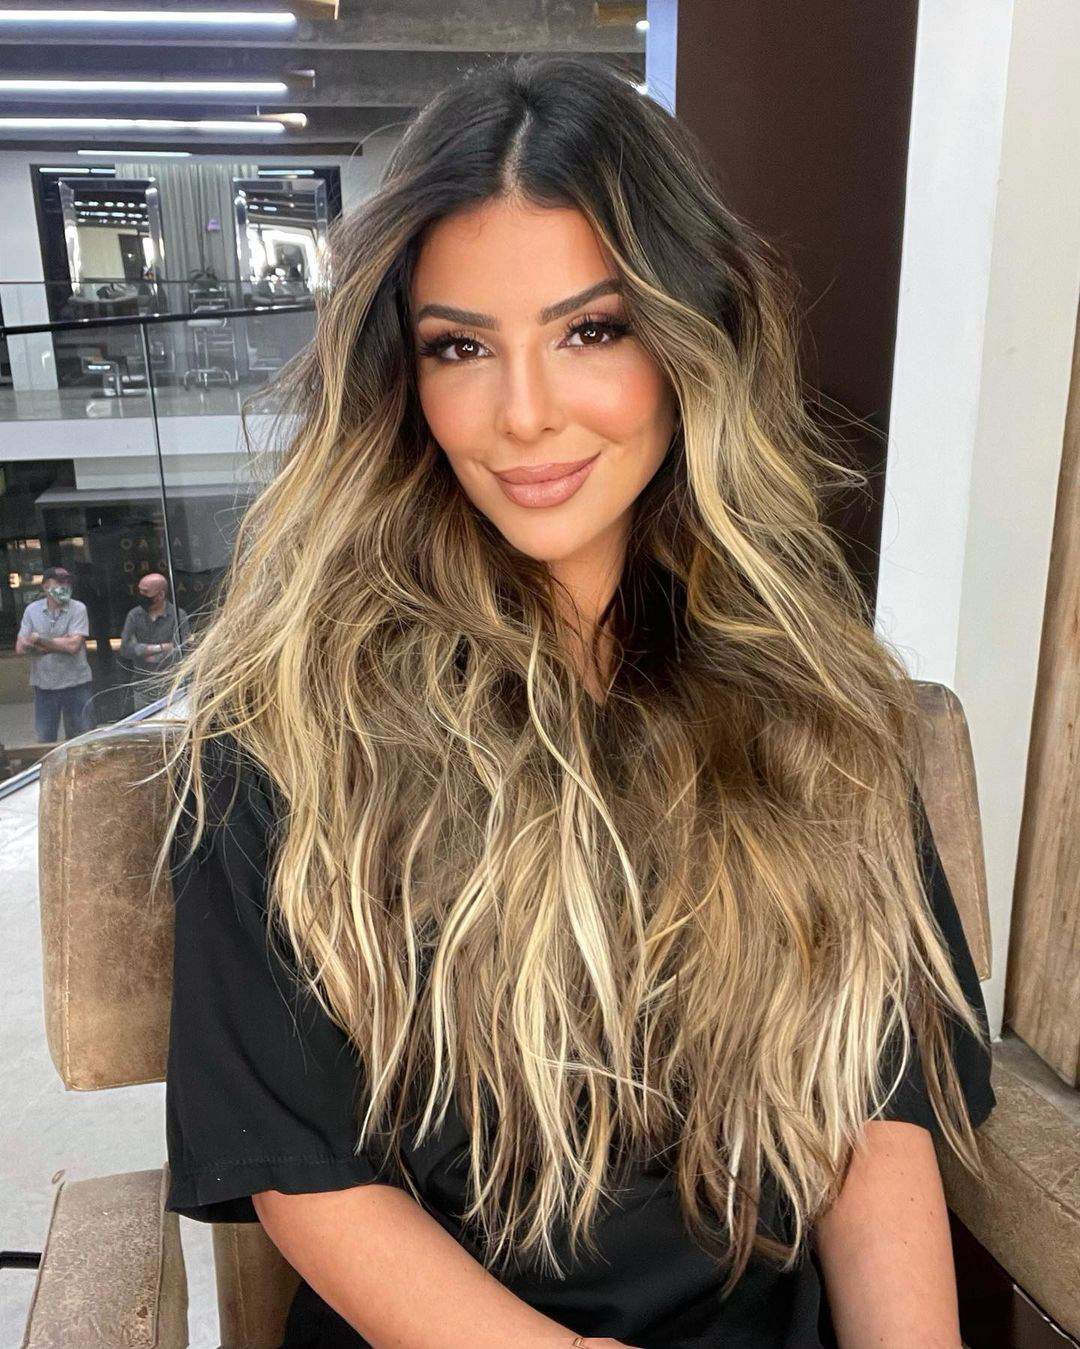 100+ Trendy Hairstyle Ideas For Women To Try In 2021 images 2